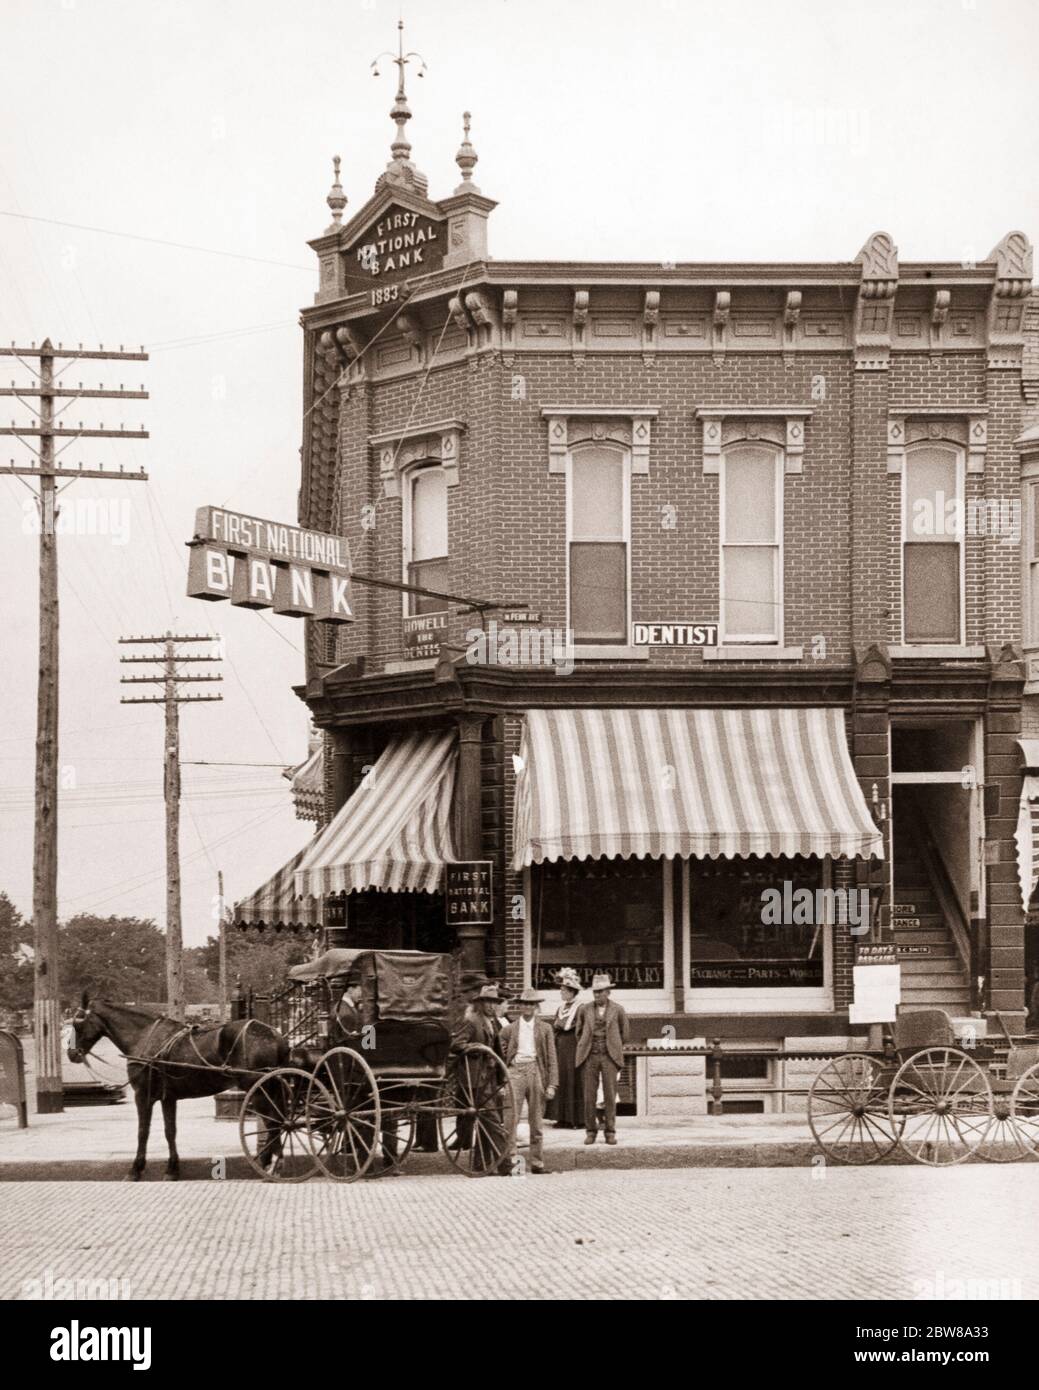 1910s PEOPLE HORSE & BUGGY IN FRONT OF FIRST NATIONAL BANK BUILDING WITH AWNINGS AND UPSTAIRS DENTIST INDEPENDENCE KANSAS USA - q49731 CPC001 HARS UNITED STATES OF AMERICA MALES CORNER KANSAS BUILDINGS WHEELS TRANSPORTATION B&W NORTH AMERICA NORTH AMERICAN MAMMALS NEIGHBORHOOD CANVAS PROPERTY KS CUSTOMER SERVICE AND CHOICE EXTERIOR INNOVATION OCCUPATIONS AWNINGS REAL ESTATE STRUCTURES UPSTAIRS WAGONS EDIFICE IN FRONT OF MAMMAL TWO STORY BLACK AND WHITE OLD FASHIONED Stock Photo